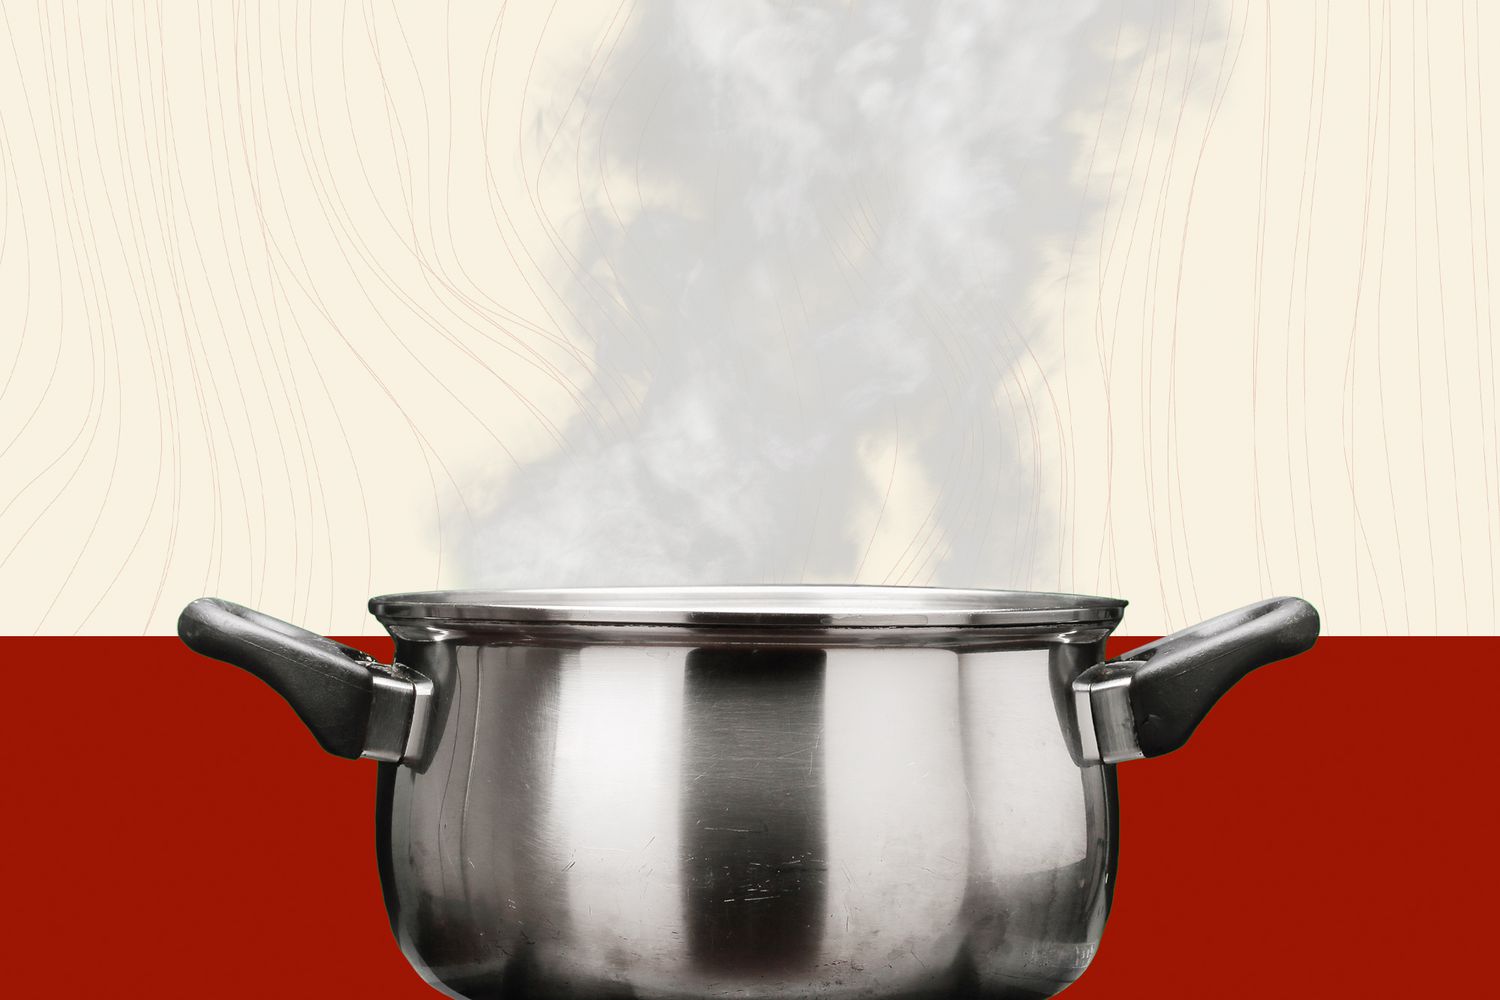 Steam coming out of a pot on a designed background